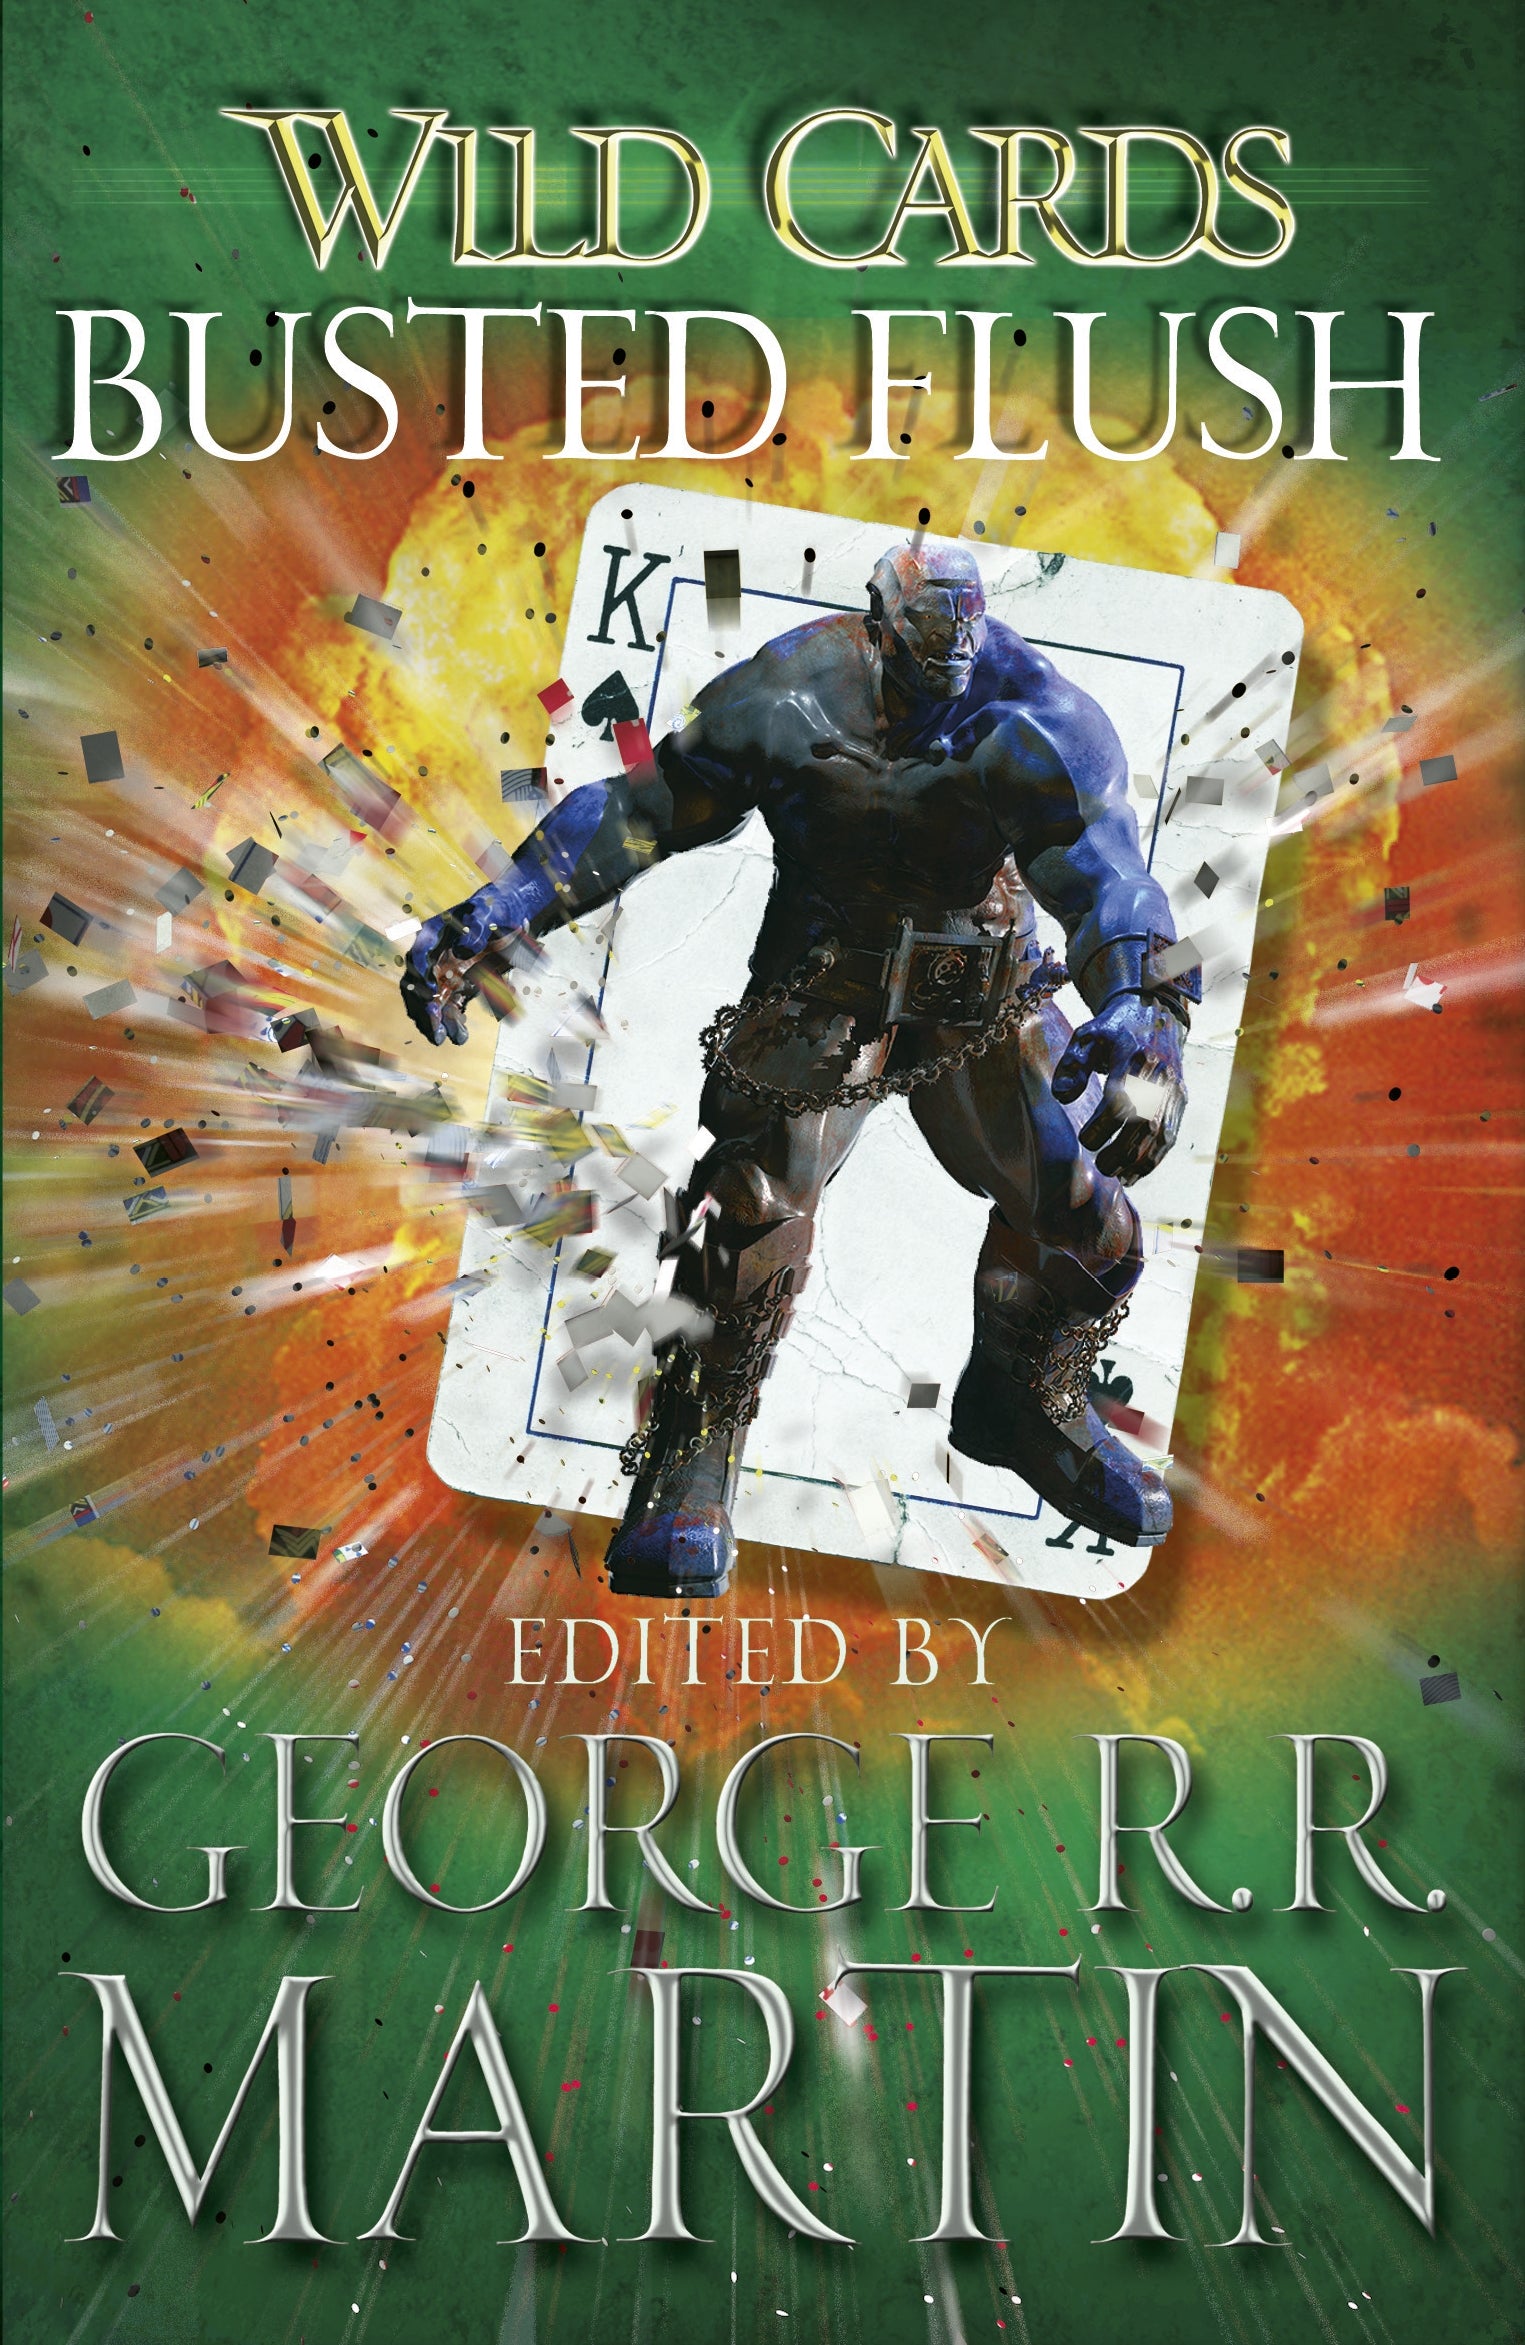 Wild Cards: Busted Flush by George R.R. Martin